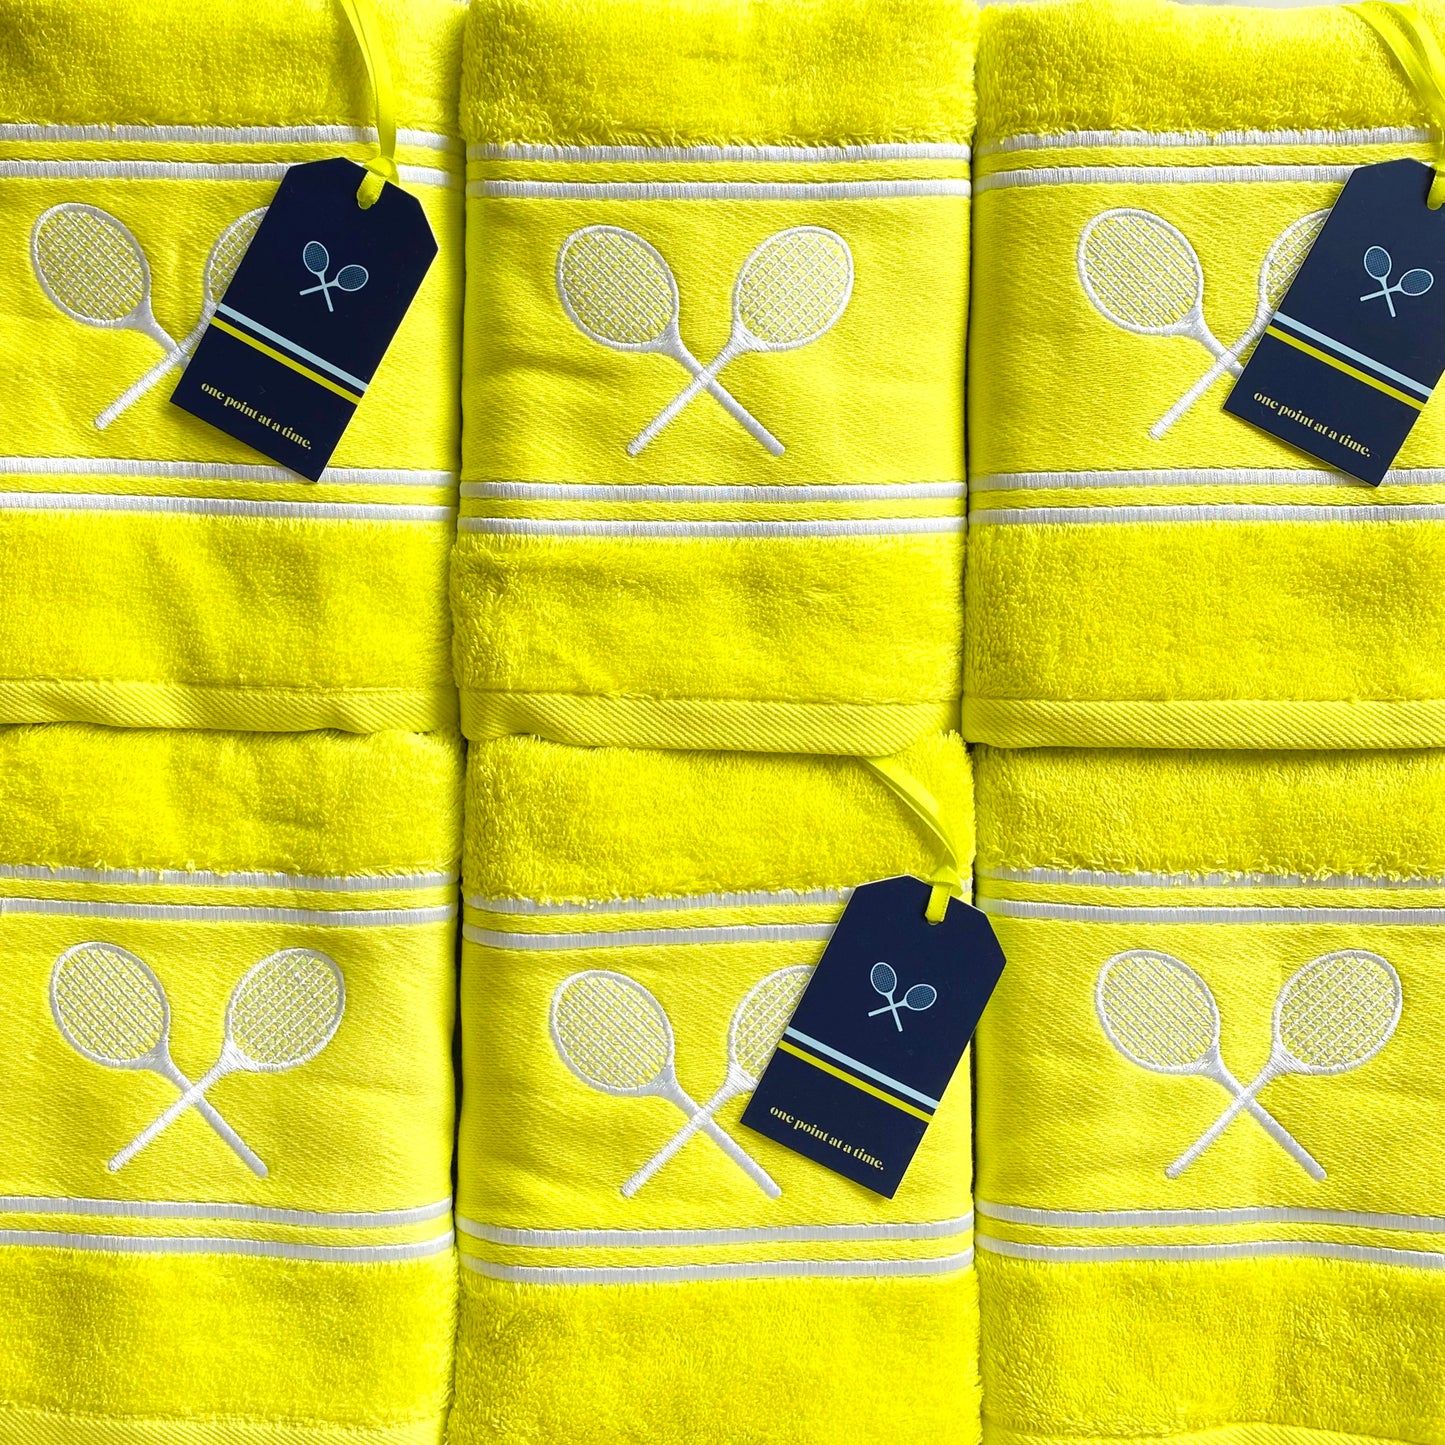 Matchtime Tennis Towel—Yellow